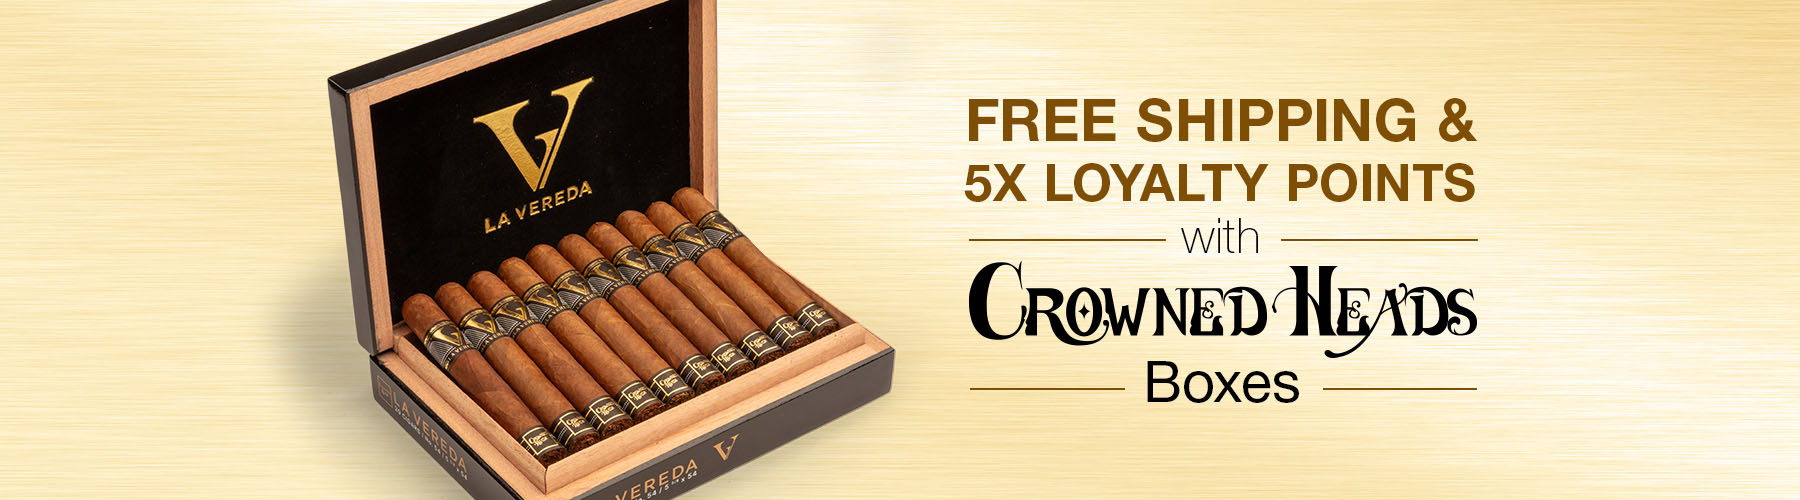 Free Shipping & 5X Loyalty Points with Crowned Heads boxes!